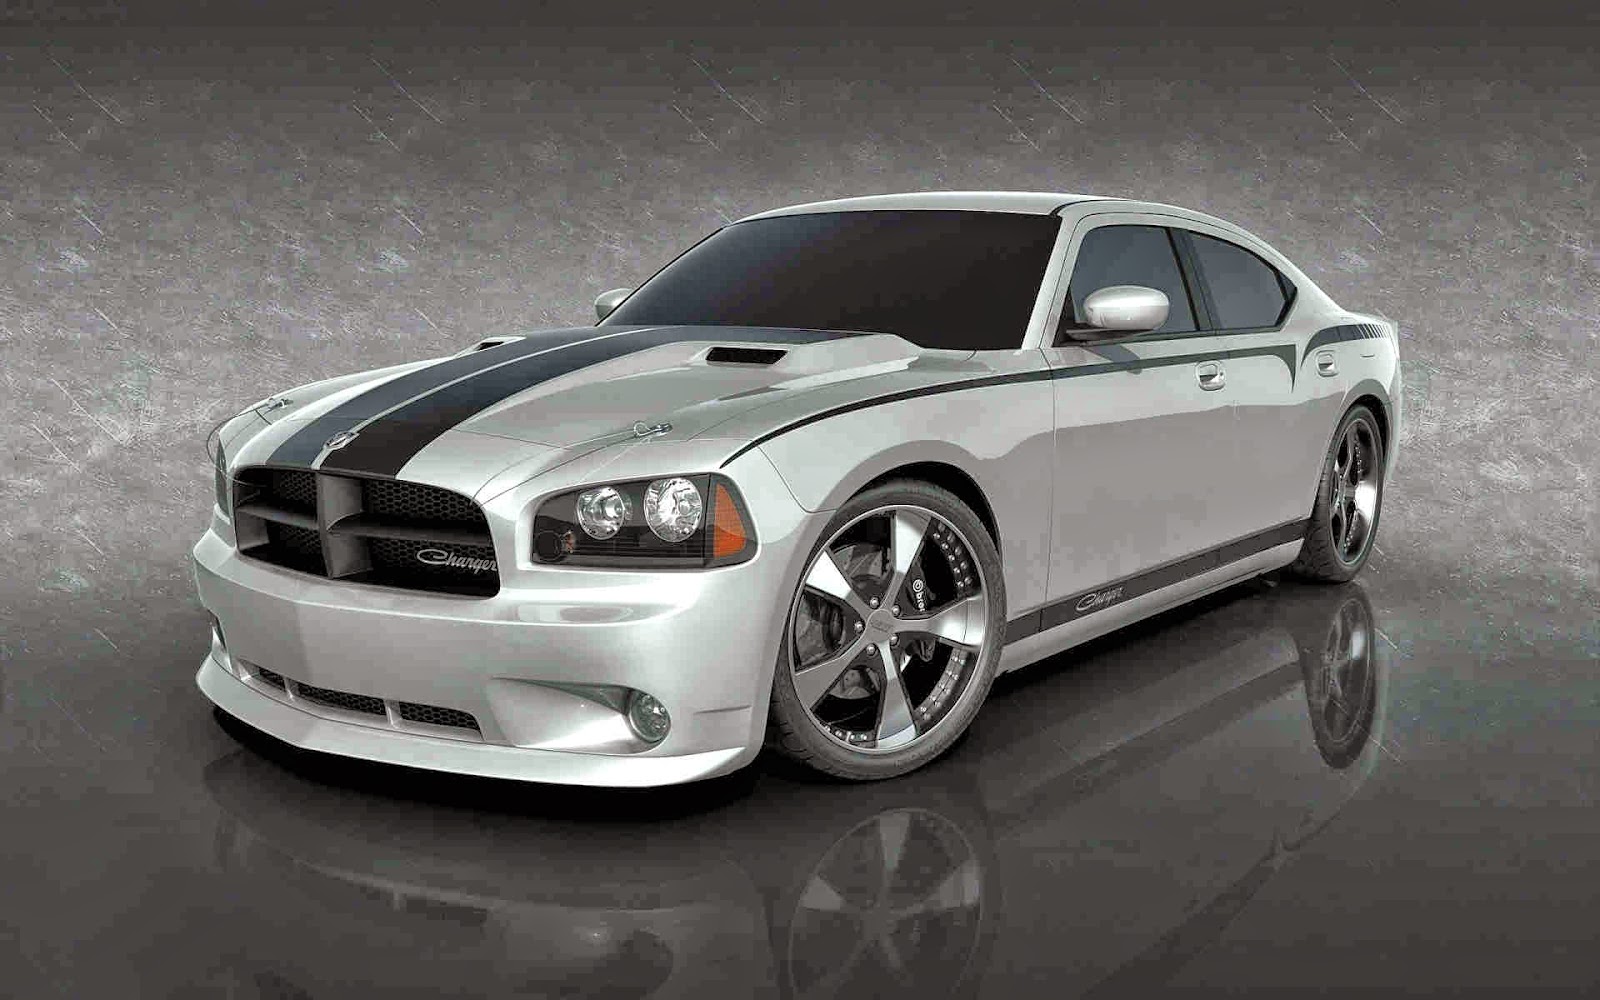 Dodge-Charger - Fast-And-Furious -Classic Car in Movie Desktop HD